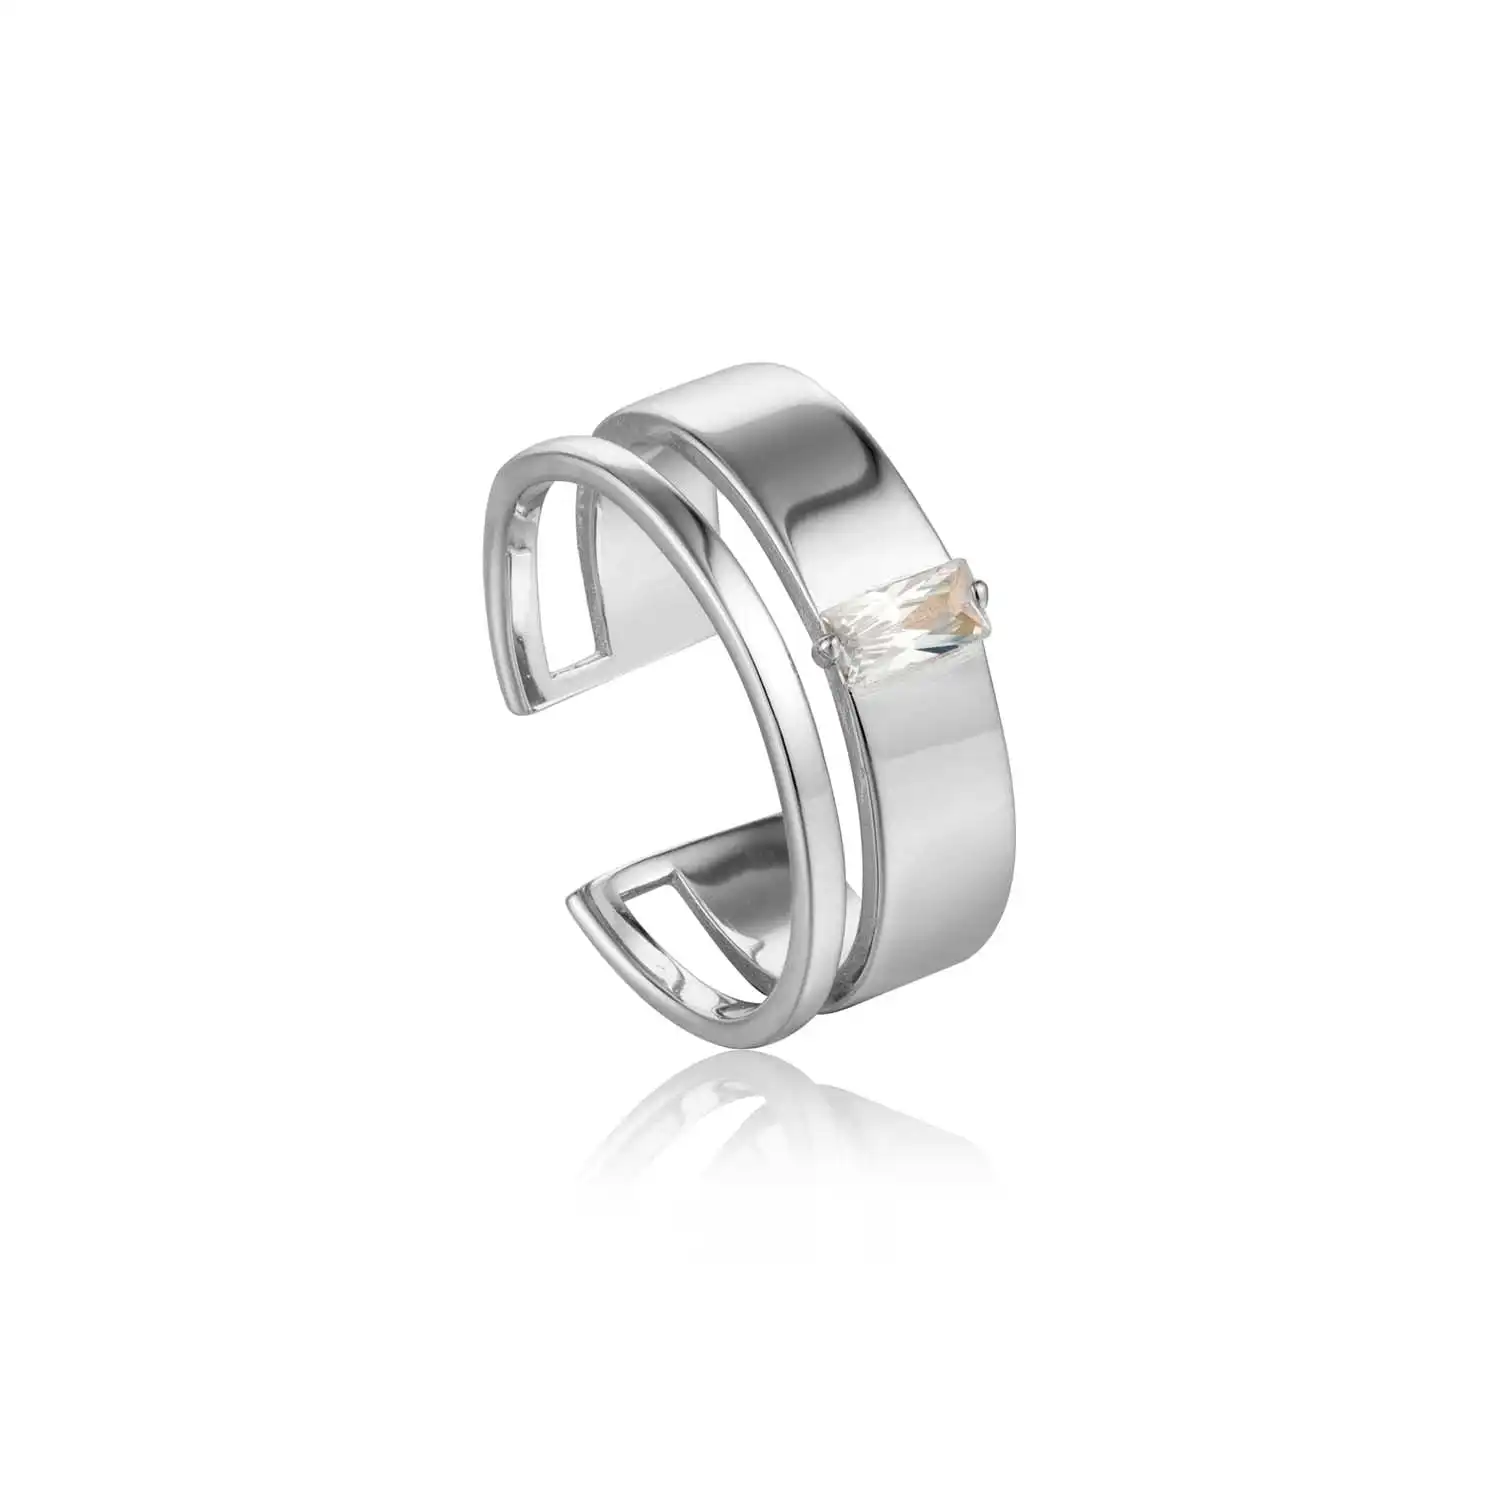 Ania Haie Glow Wide Adjustable Ring - Silver